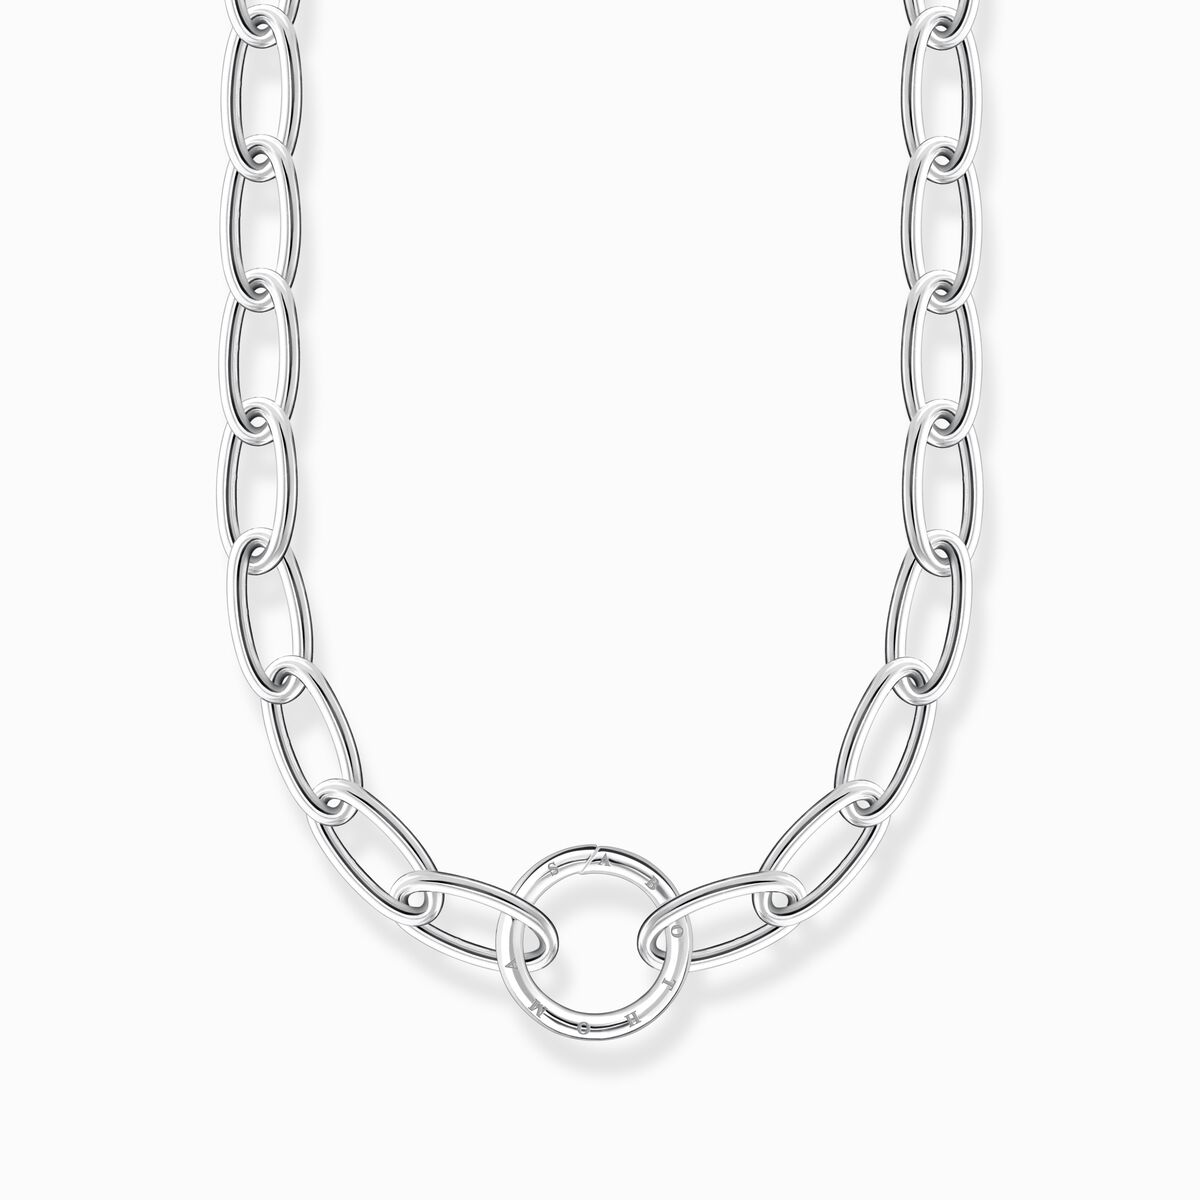 Chain necklace for women with ring clasp – THOMAS SABO | Silberketten